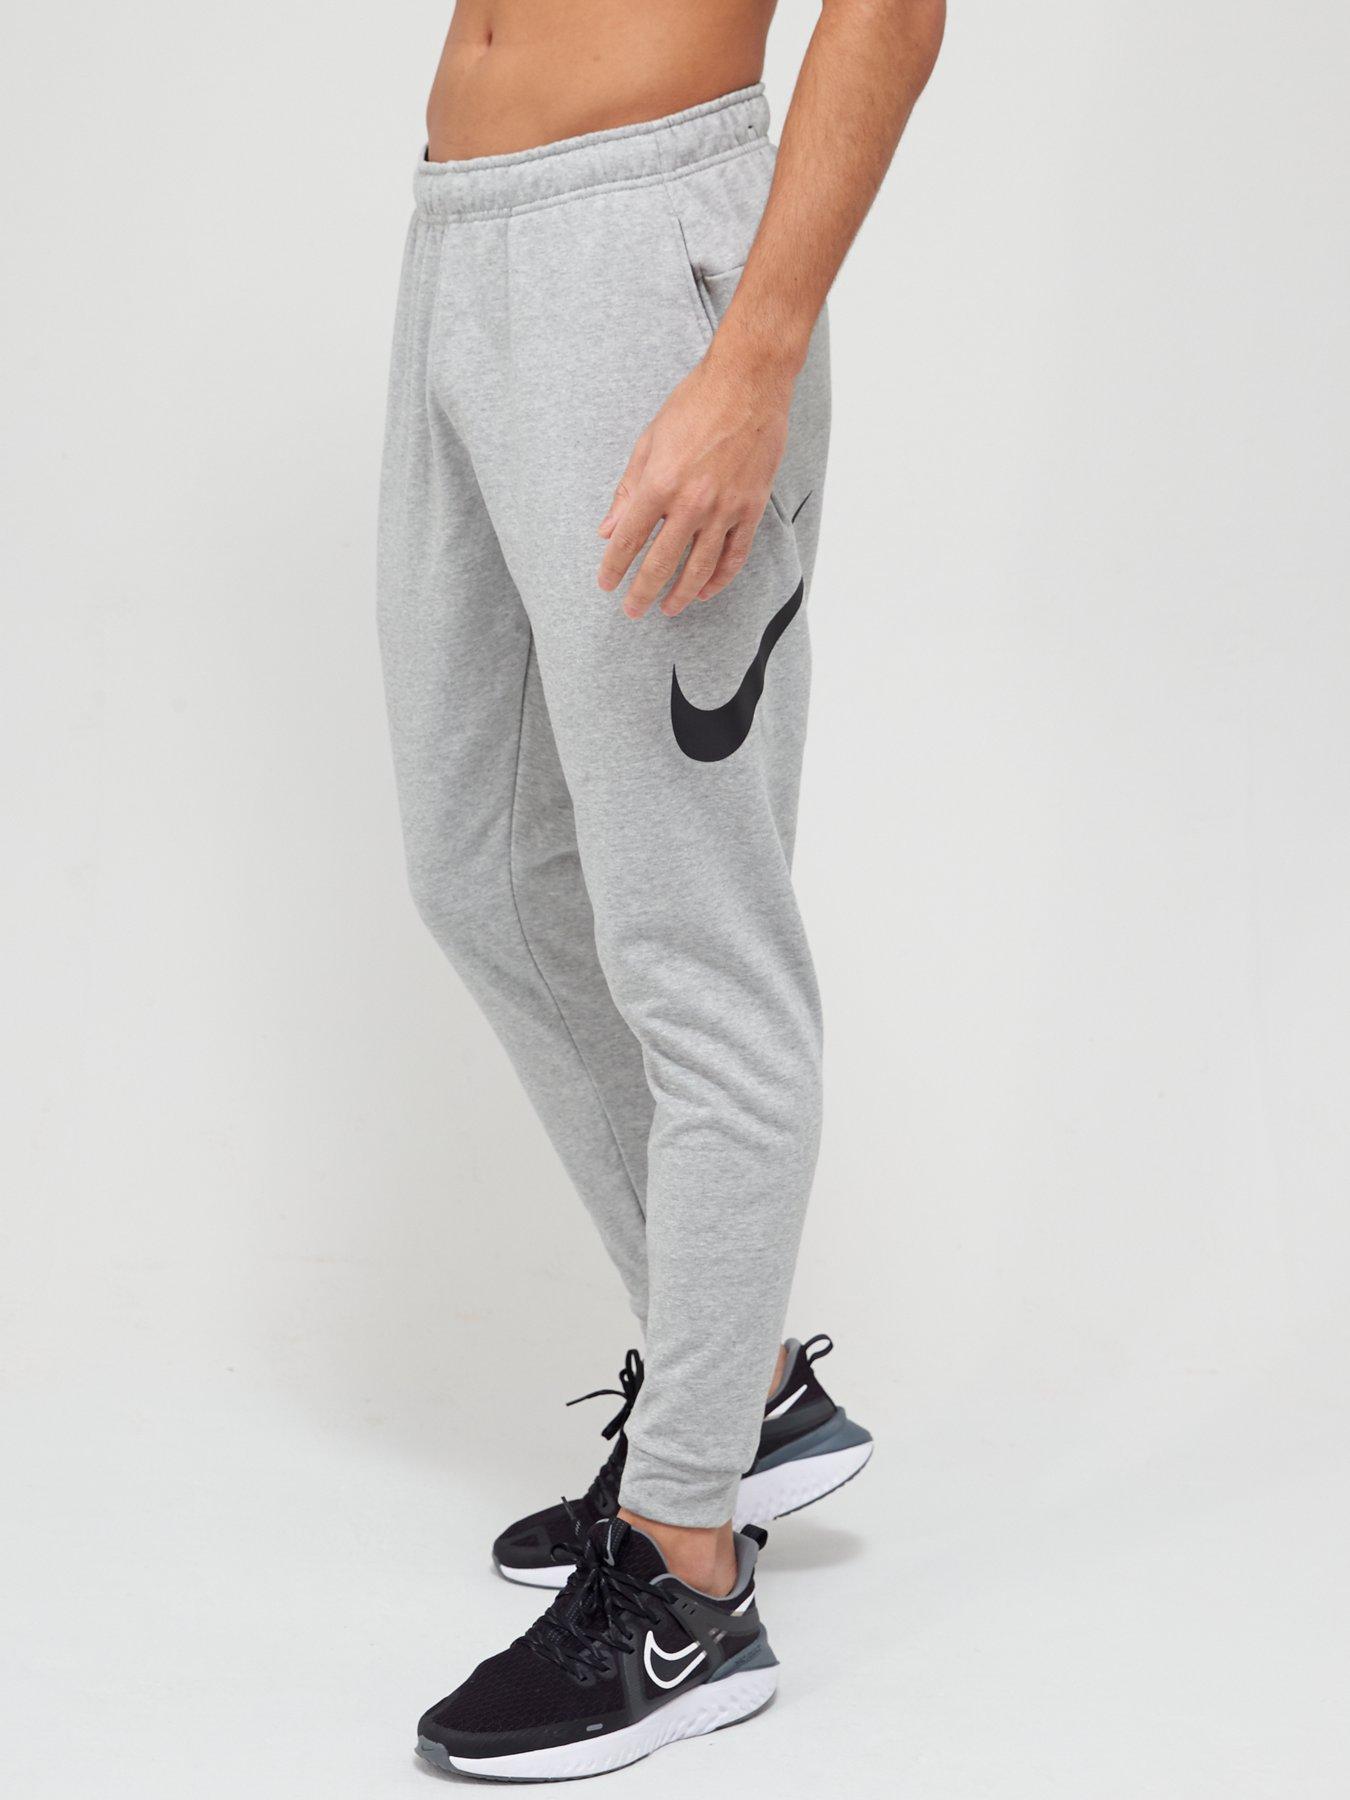 Tracksuits, Mens sports clothing, Sports & leisure, Nike